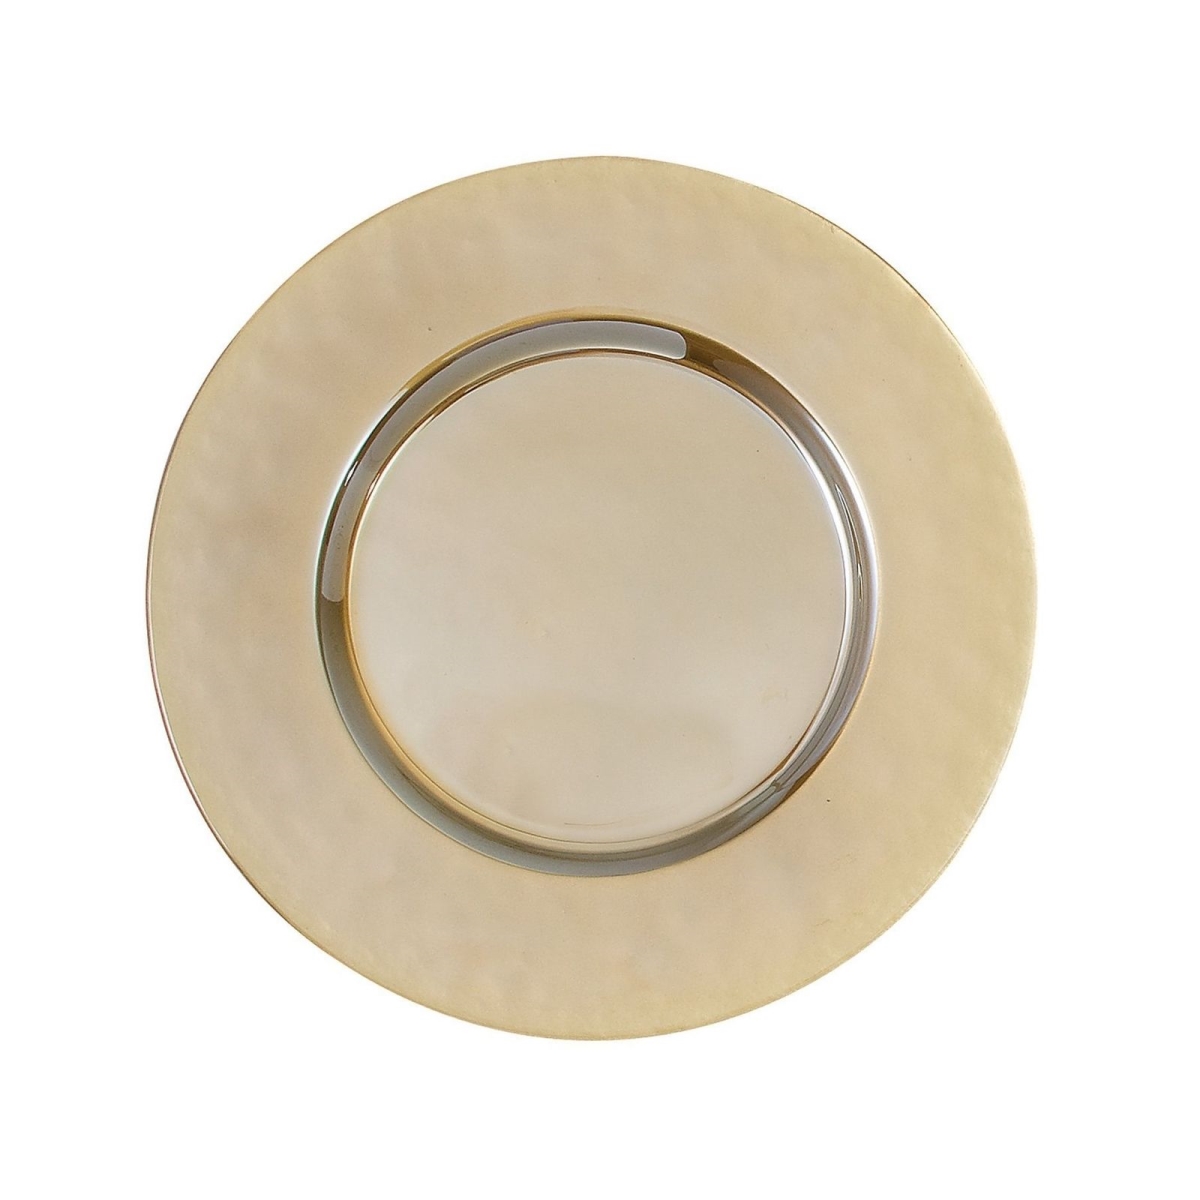 31131 Luster Chargers Plate, Gold - Set Of 4